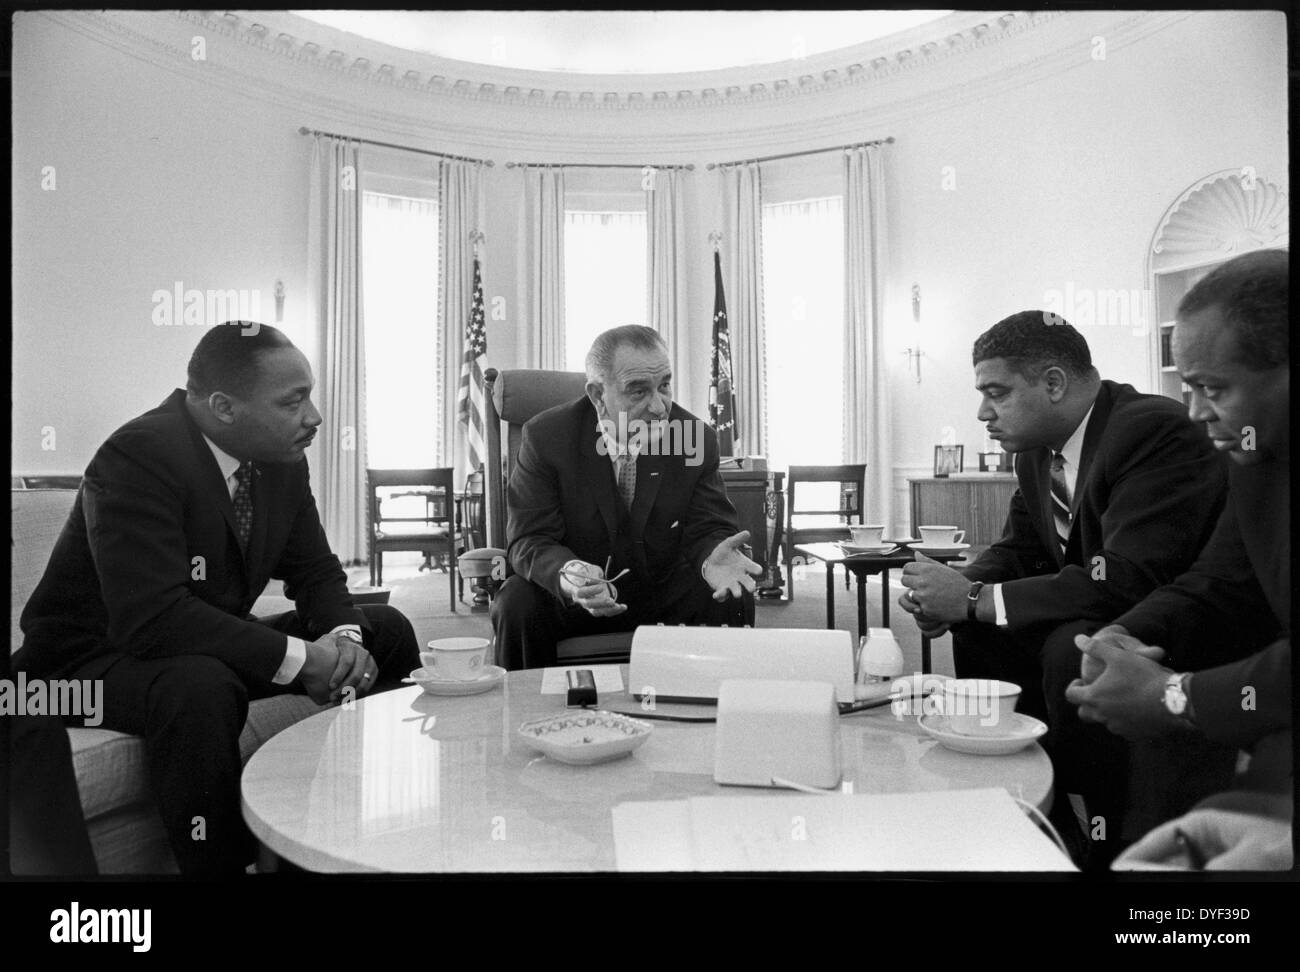 Photograph of (left to right) Martin Luther King J.r, President Lyndon Johnson and James Abernathy leaders in the Oval Office discussing the Civil Rights Movement. 1964 Stock Photo